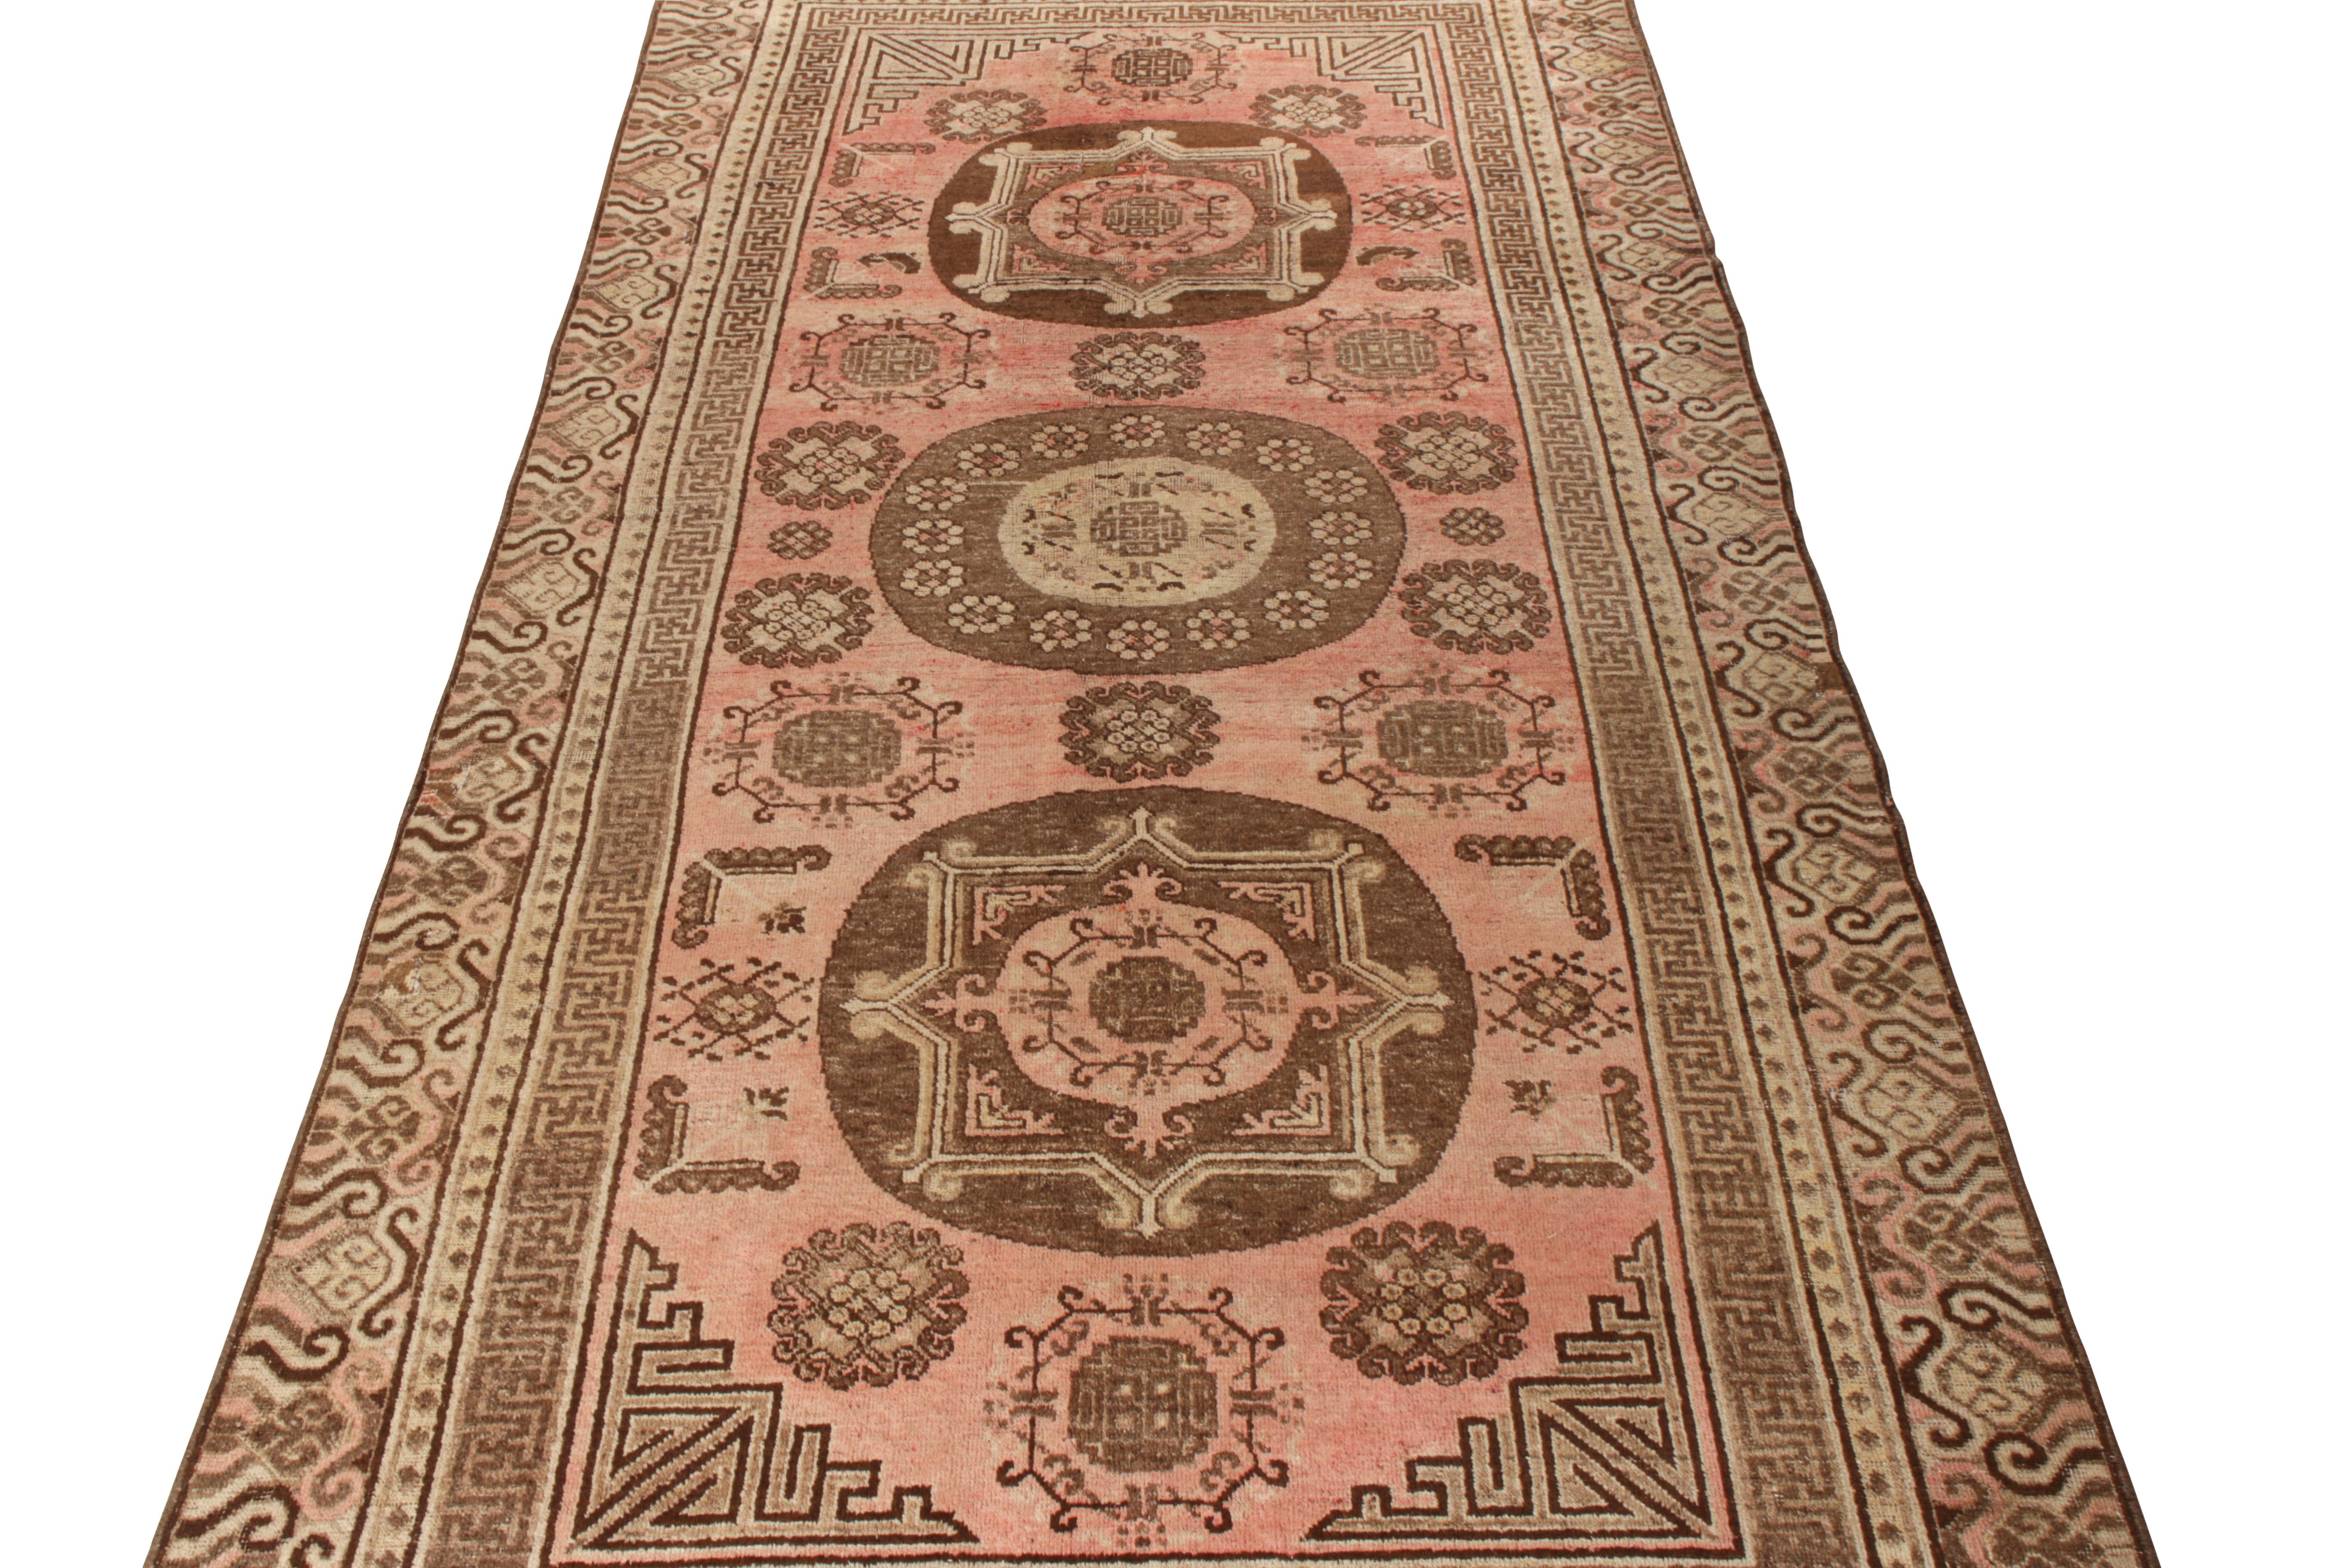 Hand knotted in fine quality wool, this 6x13 antique Khotan rug hails from East Turkestan circa 1920-1930. Featuring an abrashed pink backdrop, the sketch carries three beige-brown medallions alternating in pattern. The medallion pattern lays